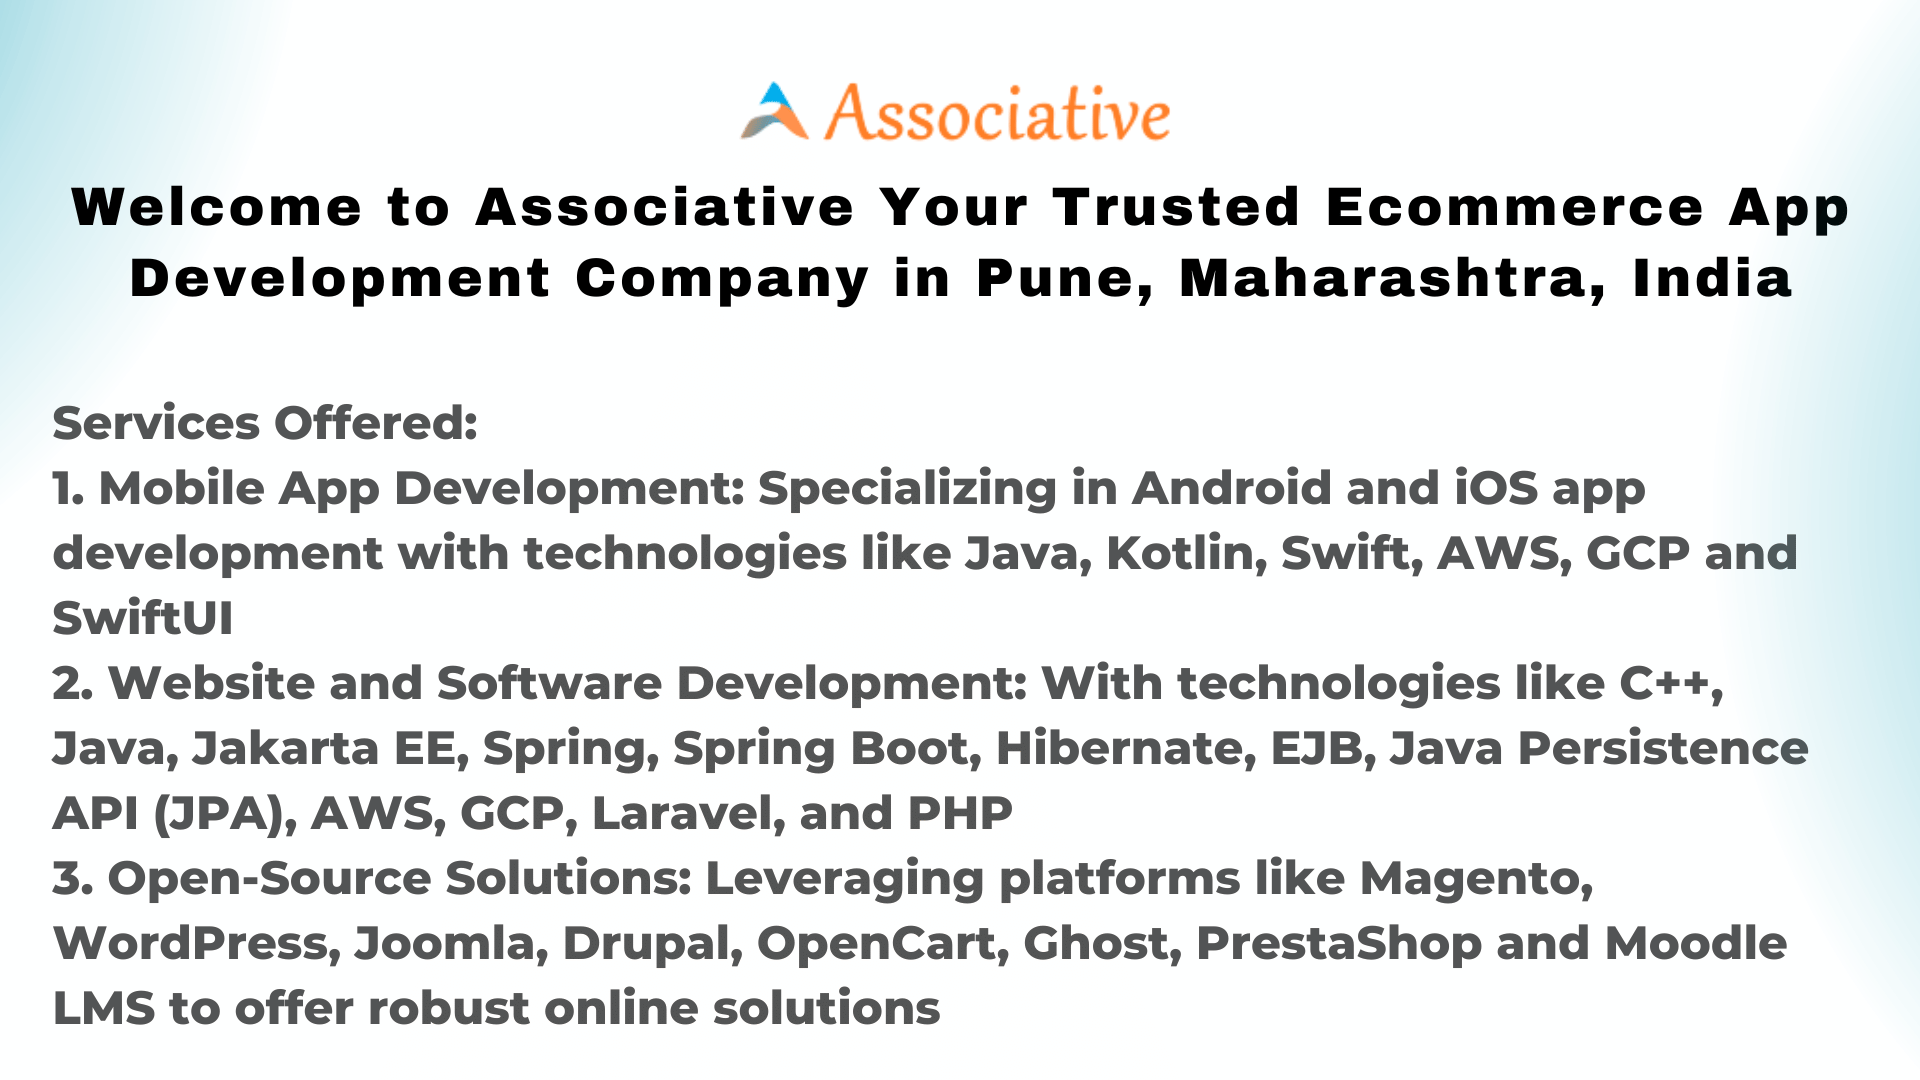 Welcome to Associative Your Trusted Ecommerce App Development Company in Pune, Maharashtra, India